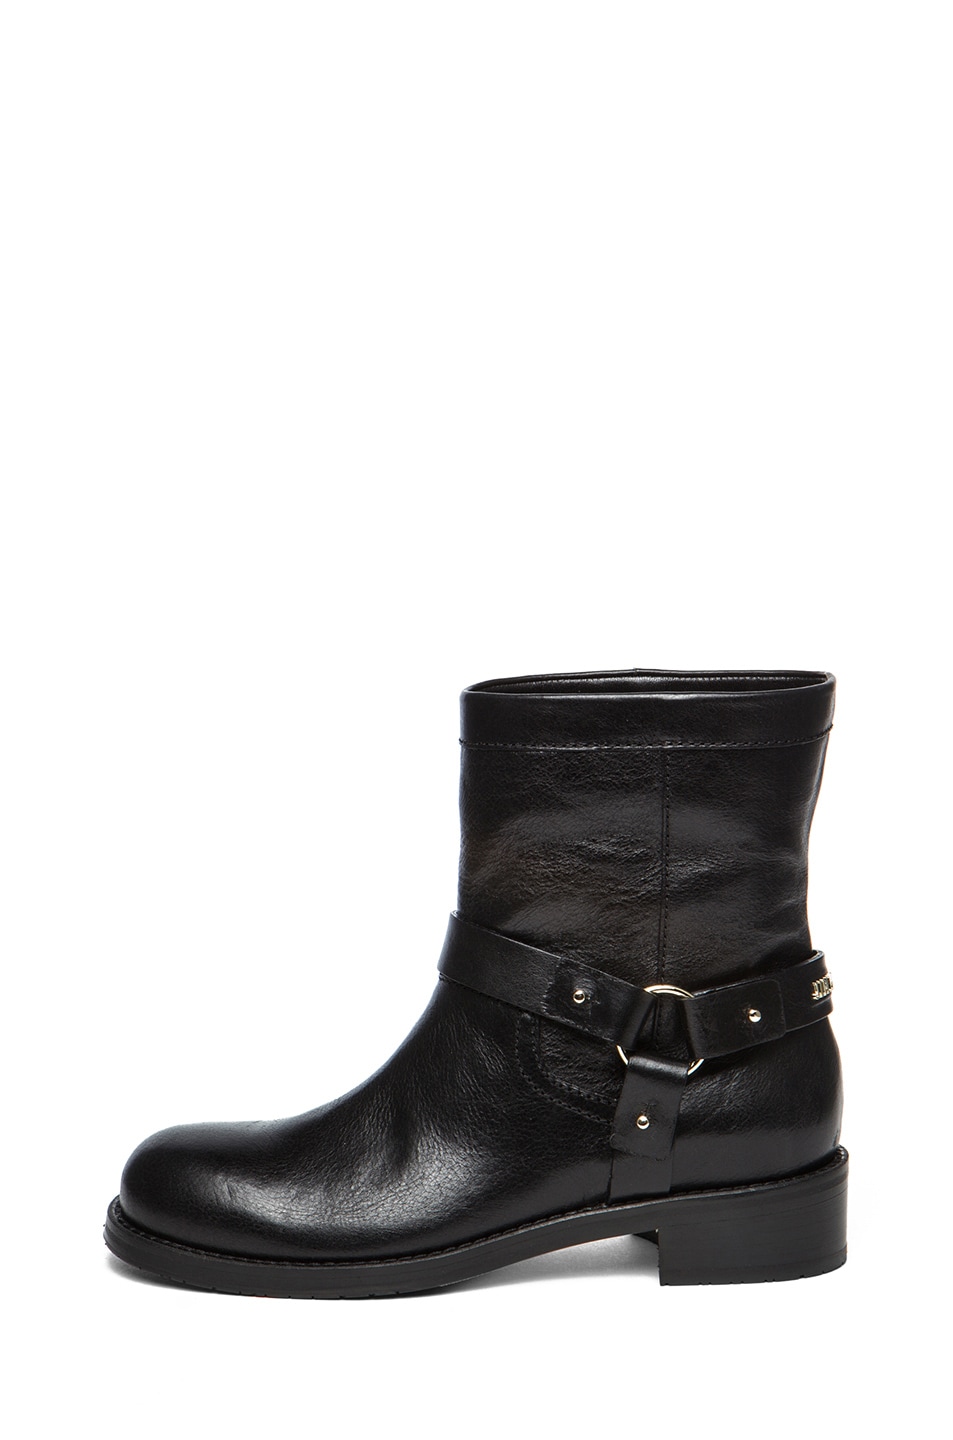 Image 1 of Jimmy Choo Dixie Shiny Calfskin Leather Flat Ankle Boot in Black